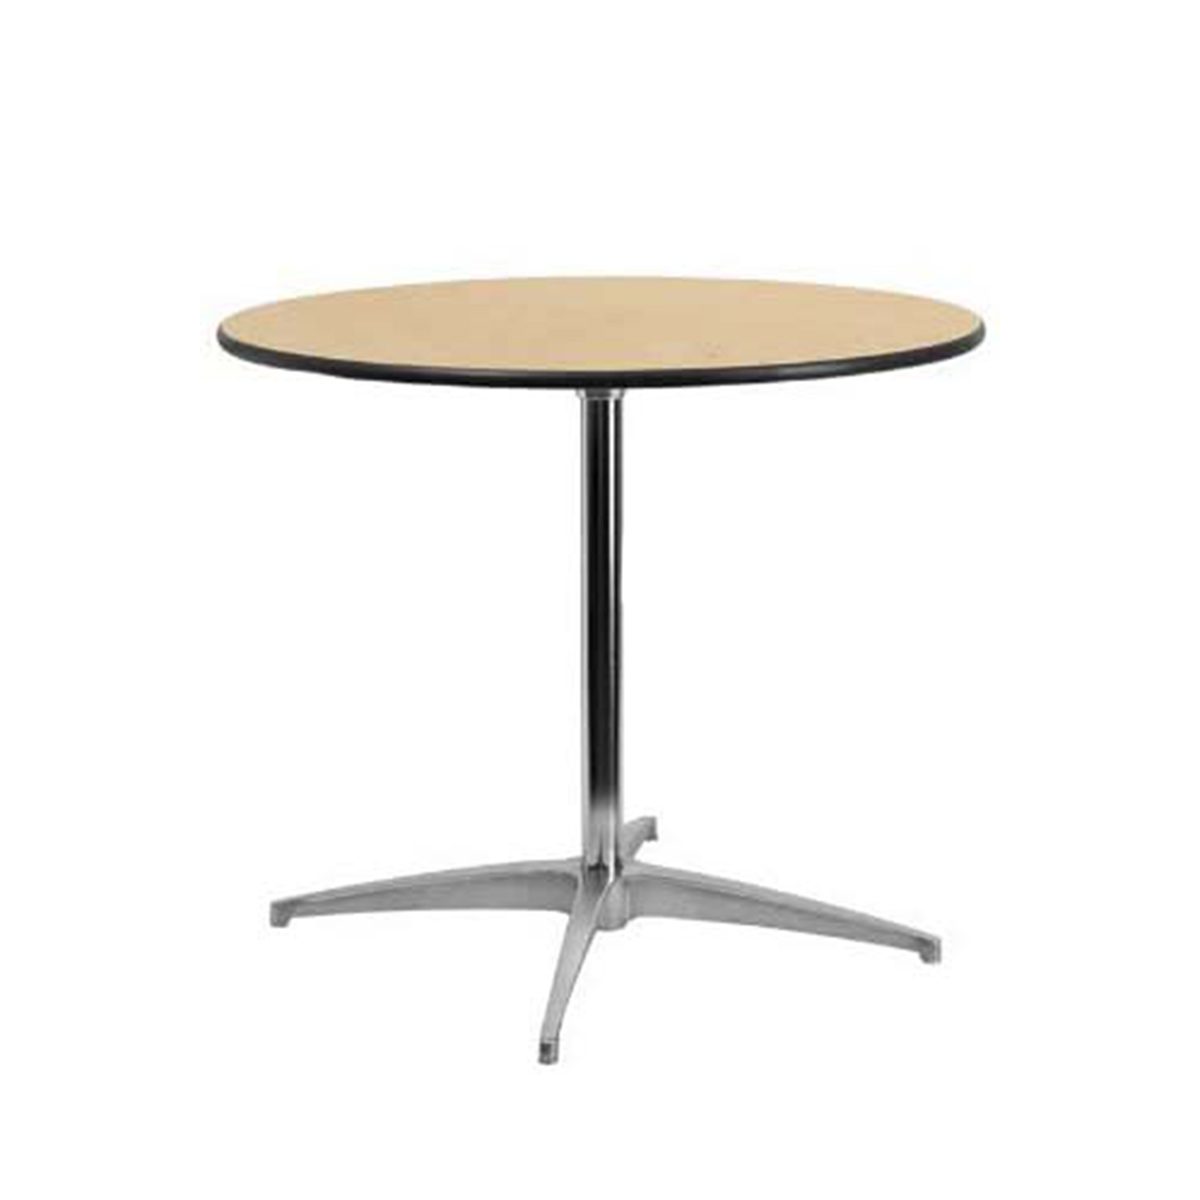 30 (inch tall) 30 (inch round) Wood Cocktail Table with Spandex Table Cover